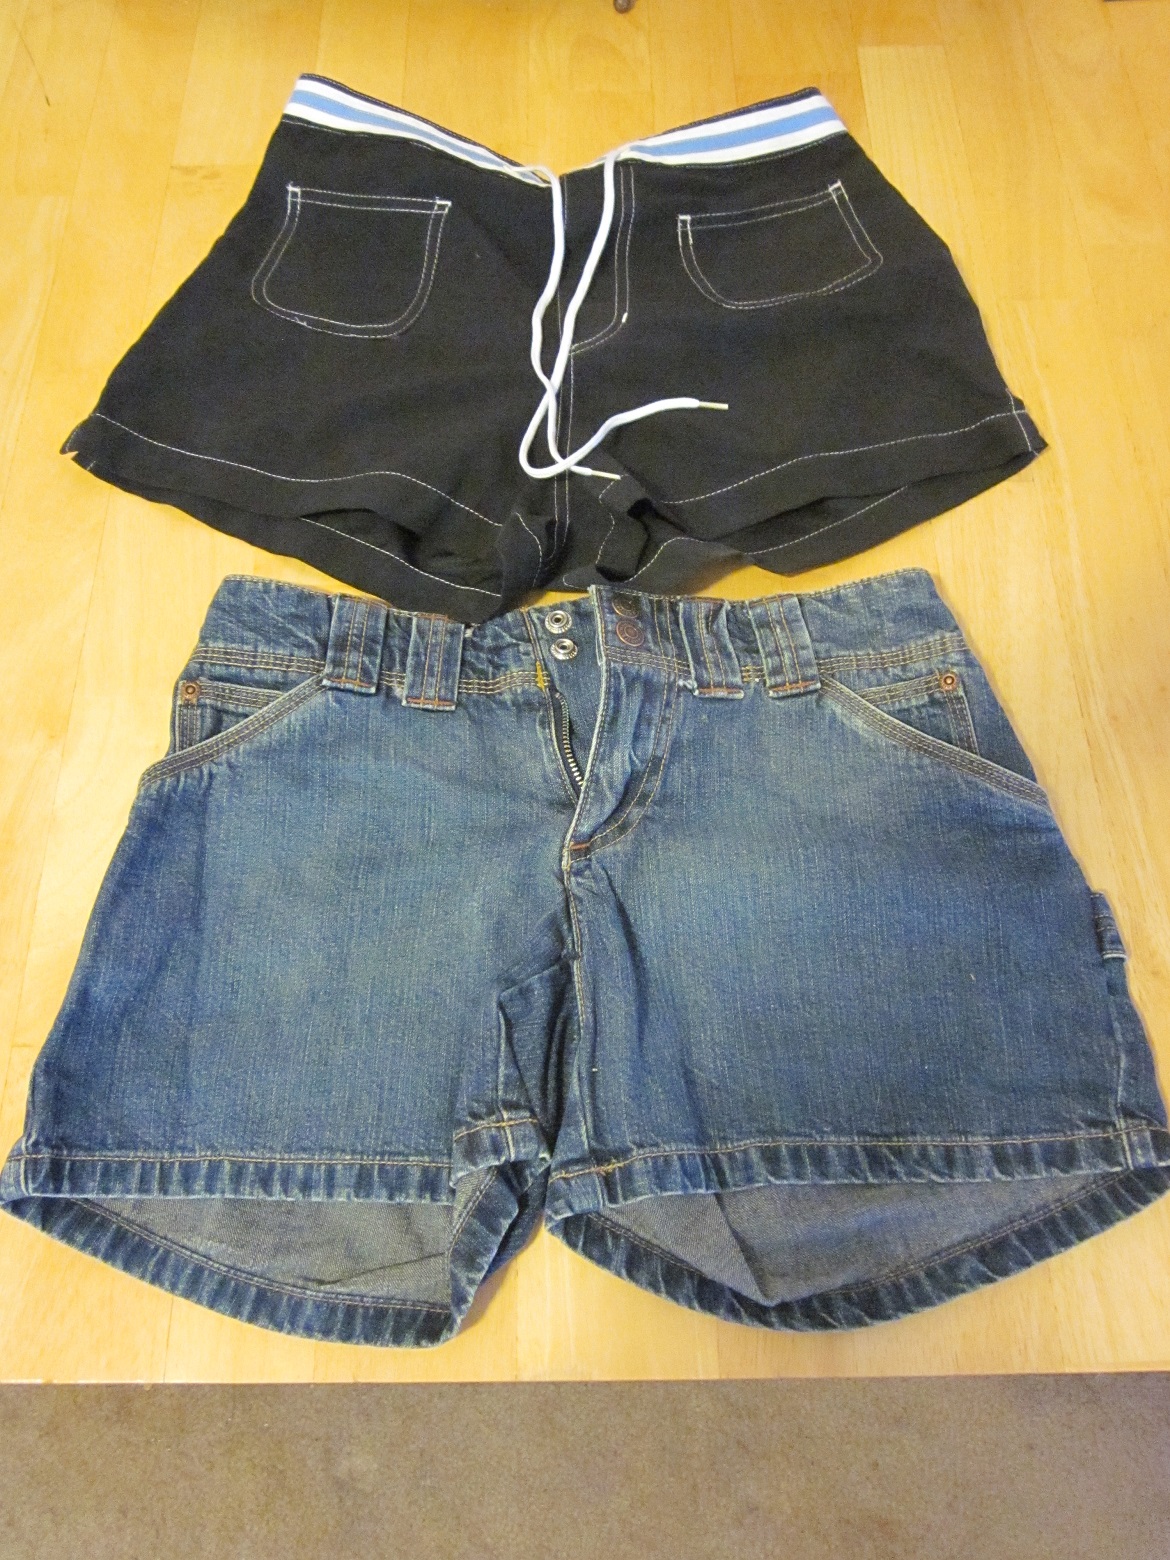 Two Pairs of Shorts - Small (5/7) and Size 1